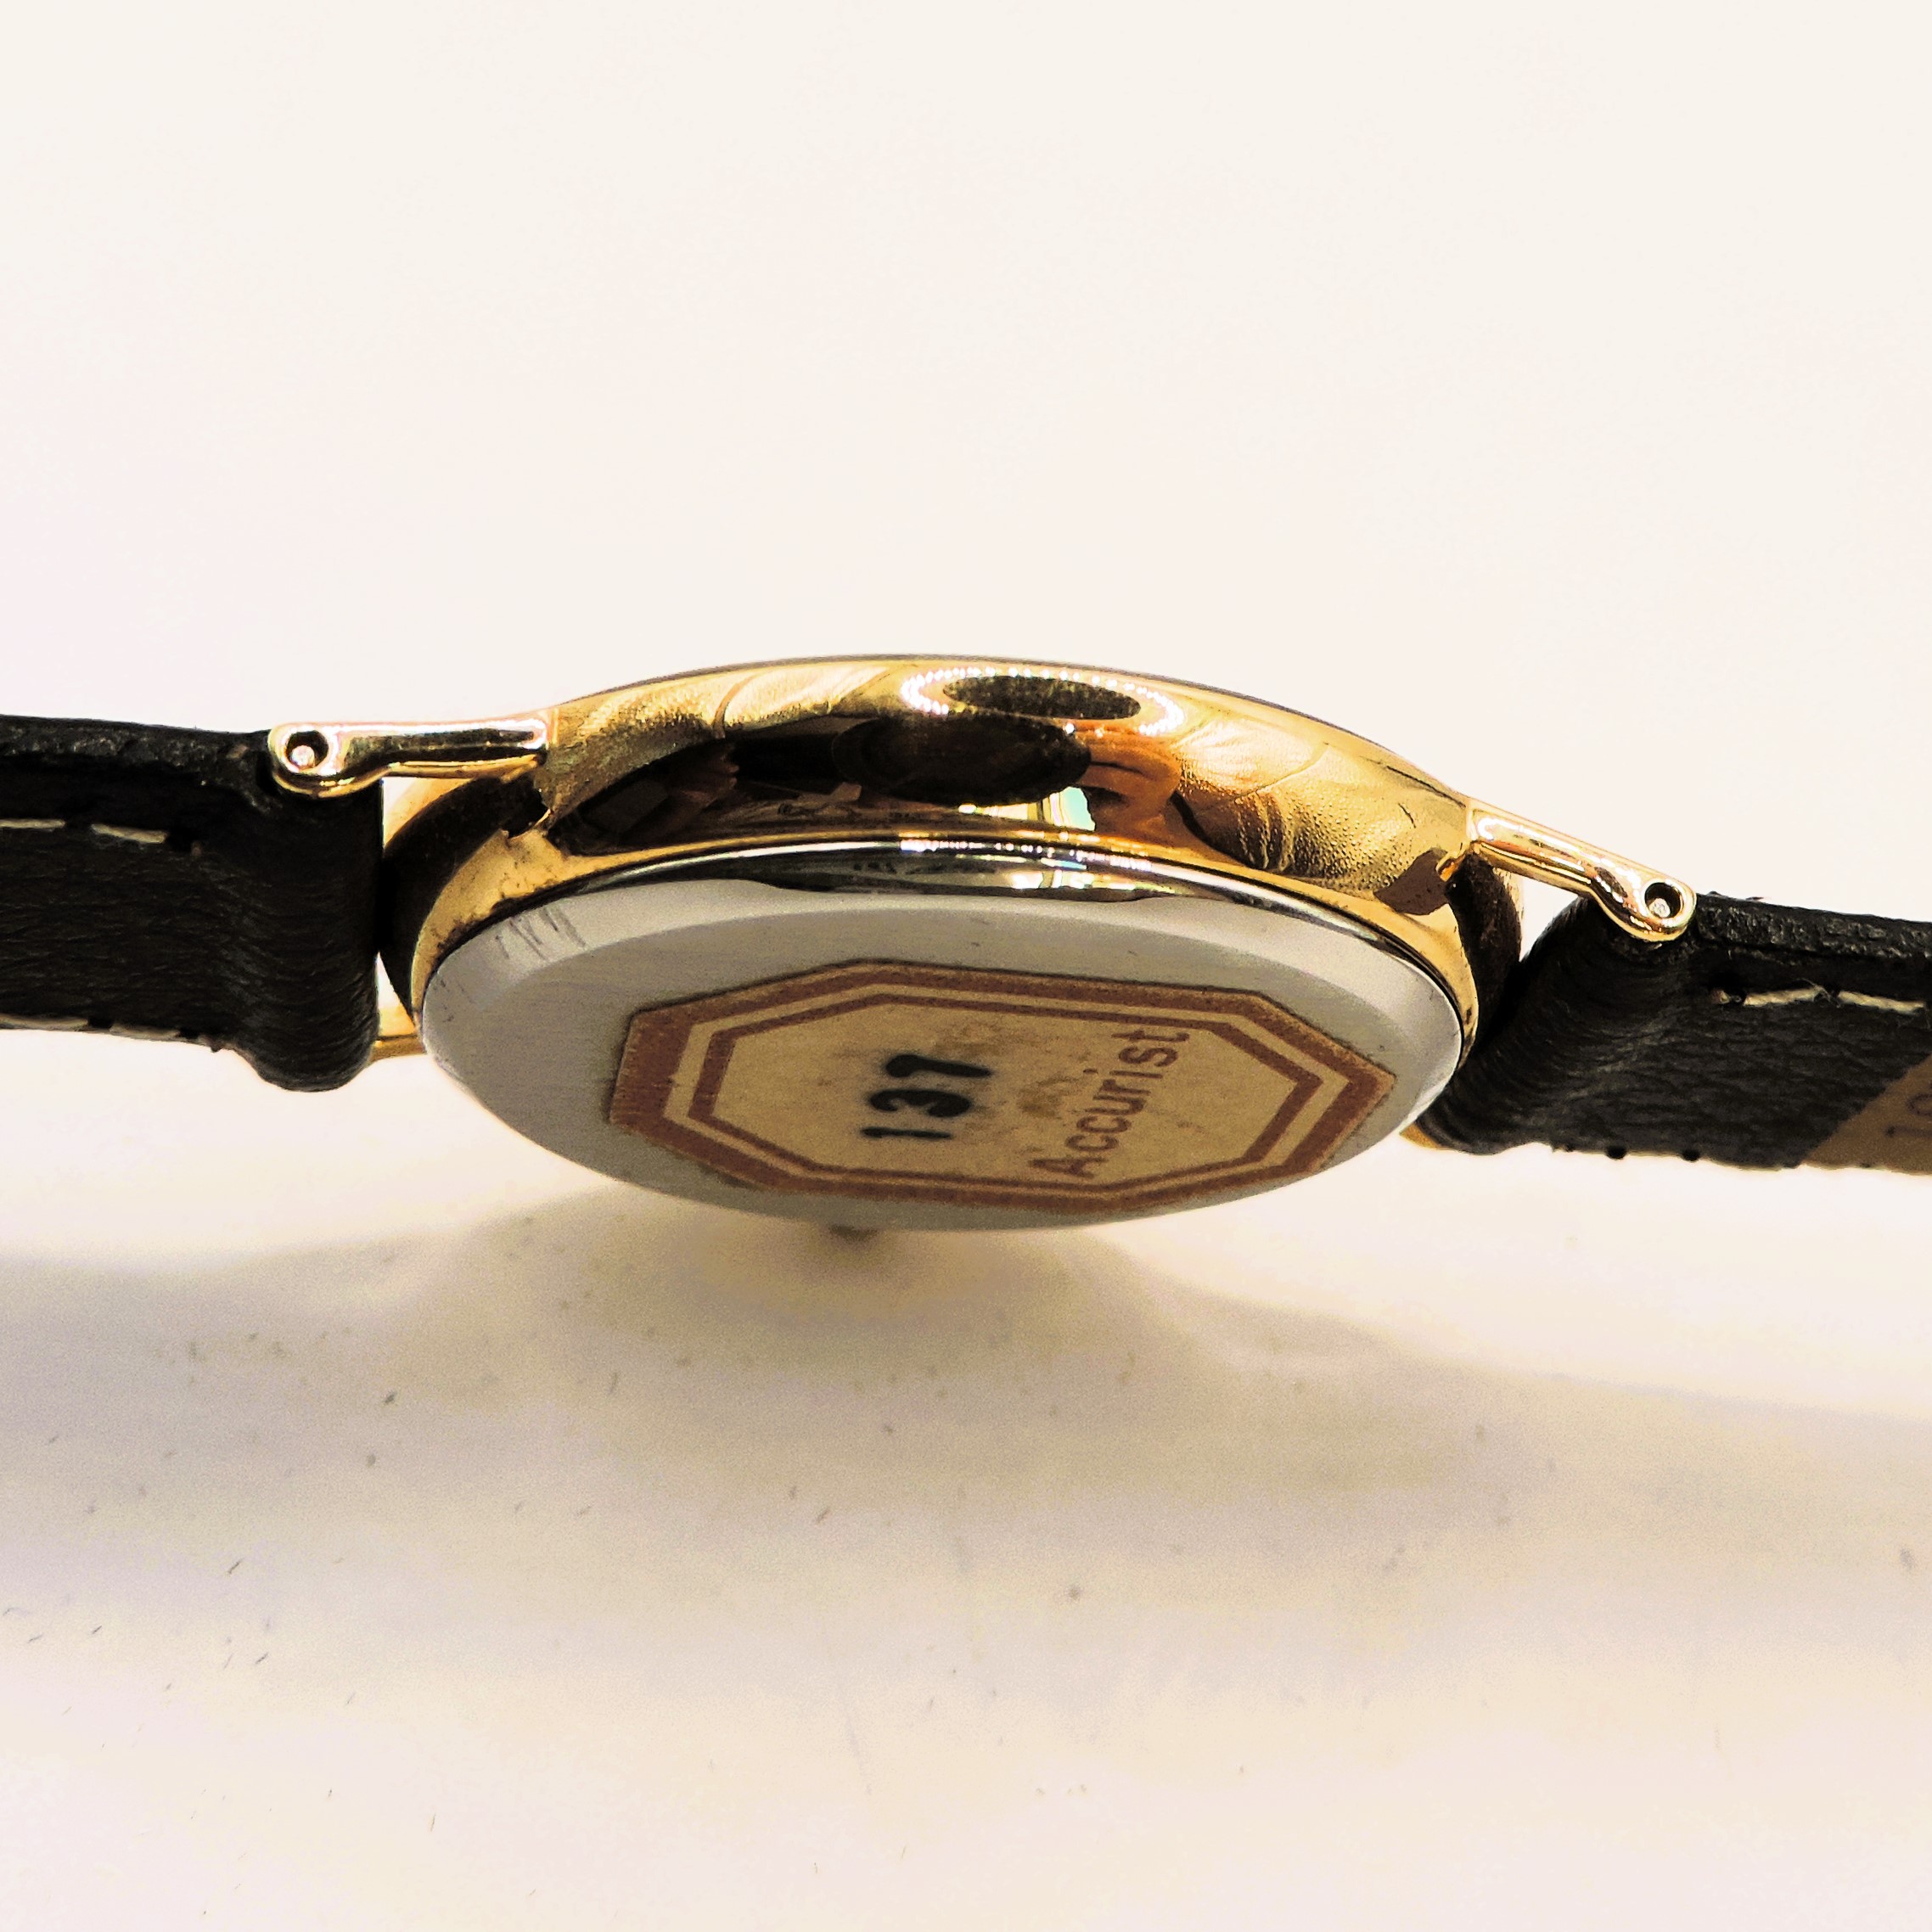 Accurist Slim Watch #137000 Gold Plated Leather Strap Original Box New Battery Working - Image 6 of 8